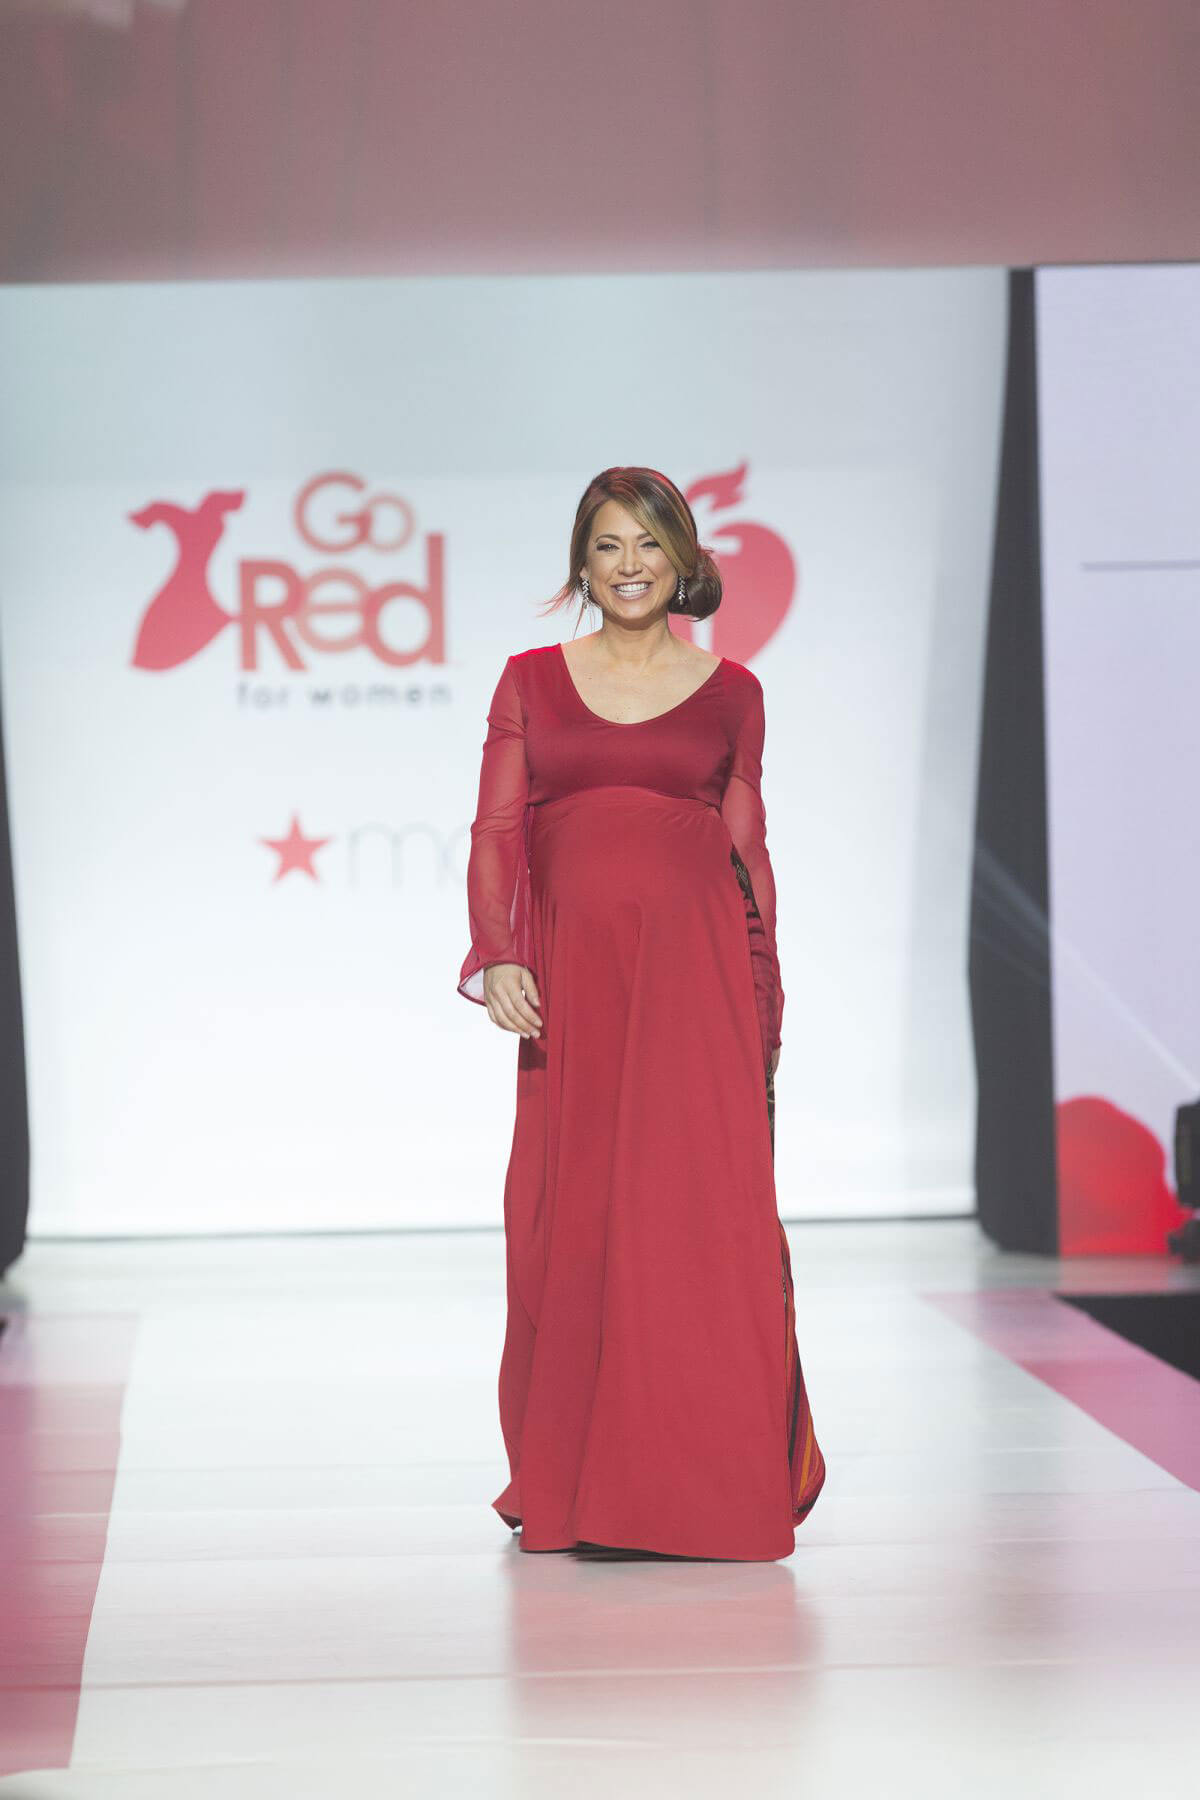 Pregnant Ginger Zee Stills in Gown by Galia Lahav at Red Dress 2018 Collection Fashion Show in New York 2018/02/08